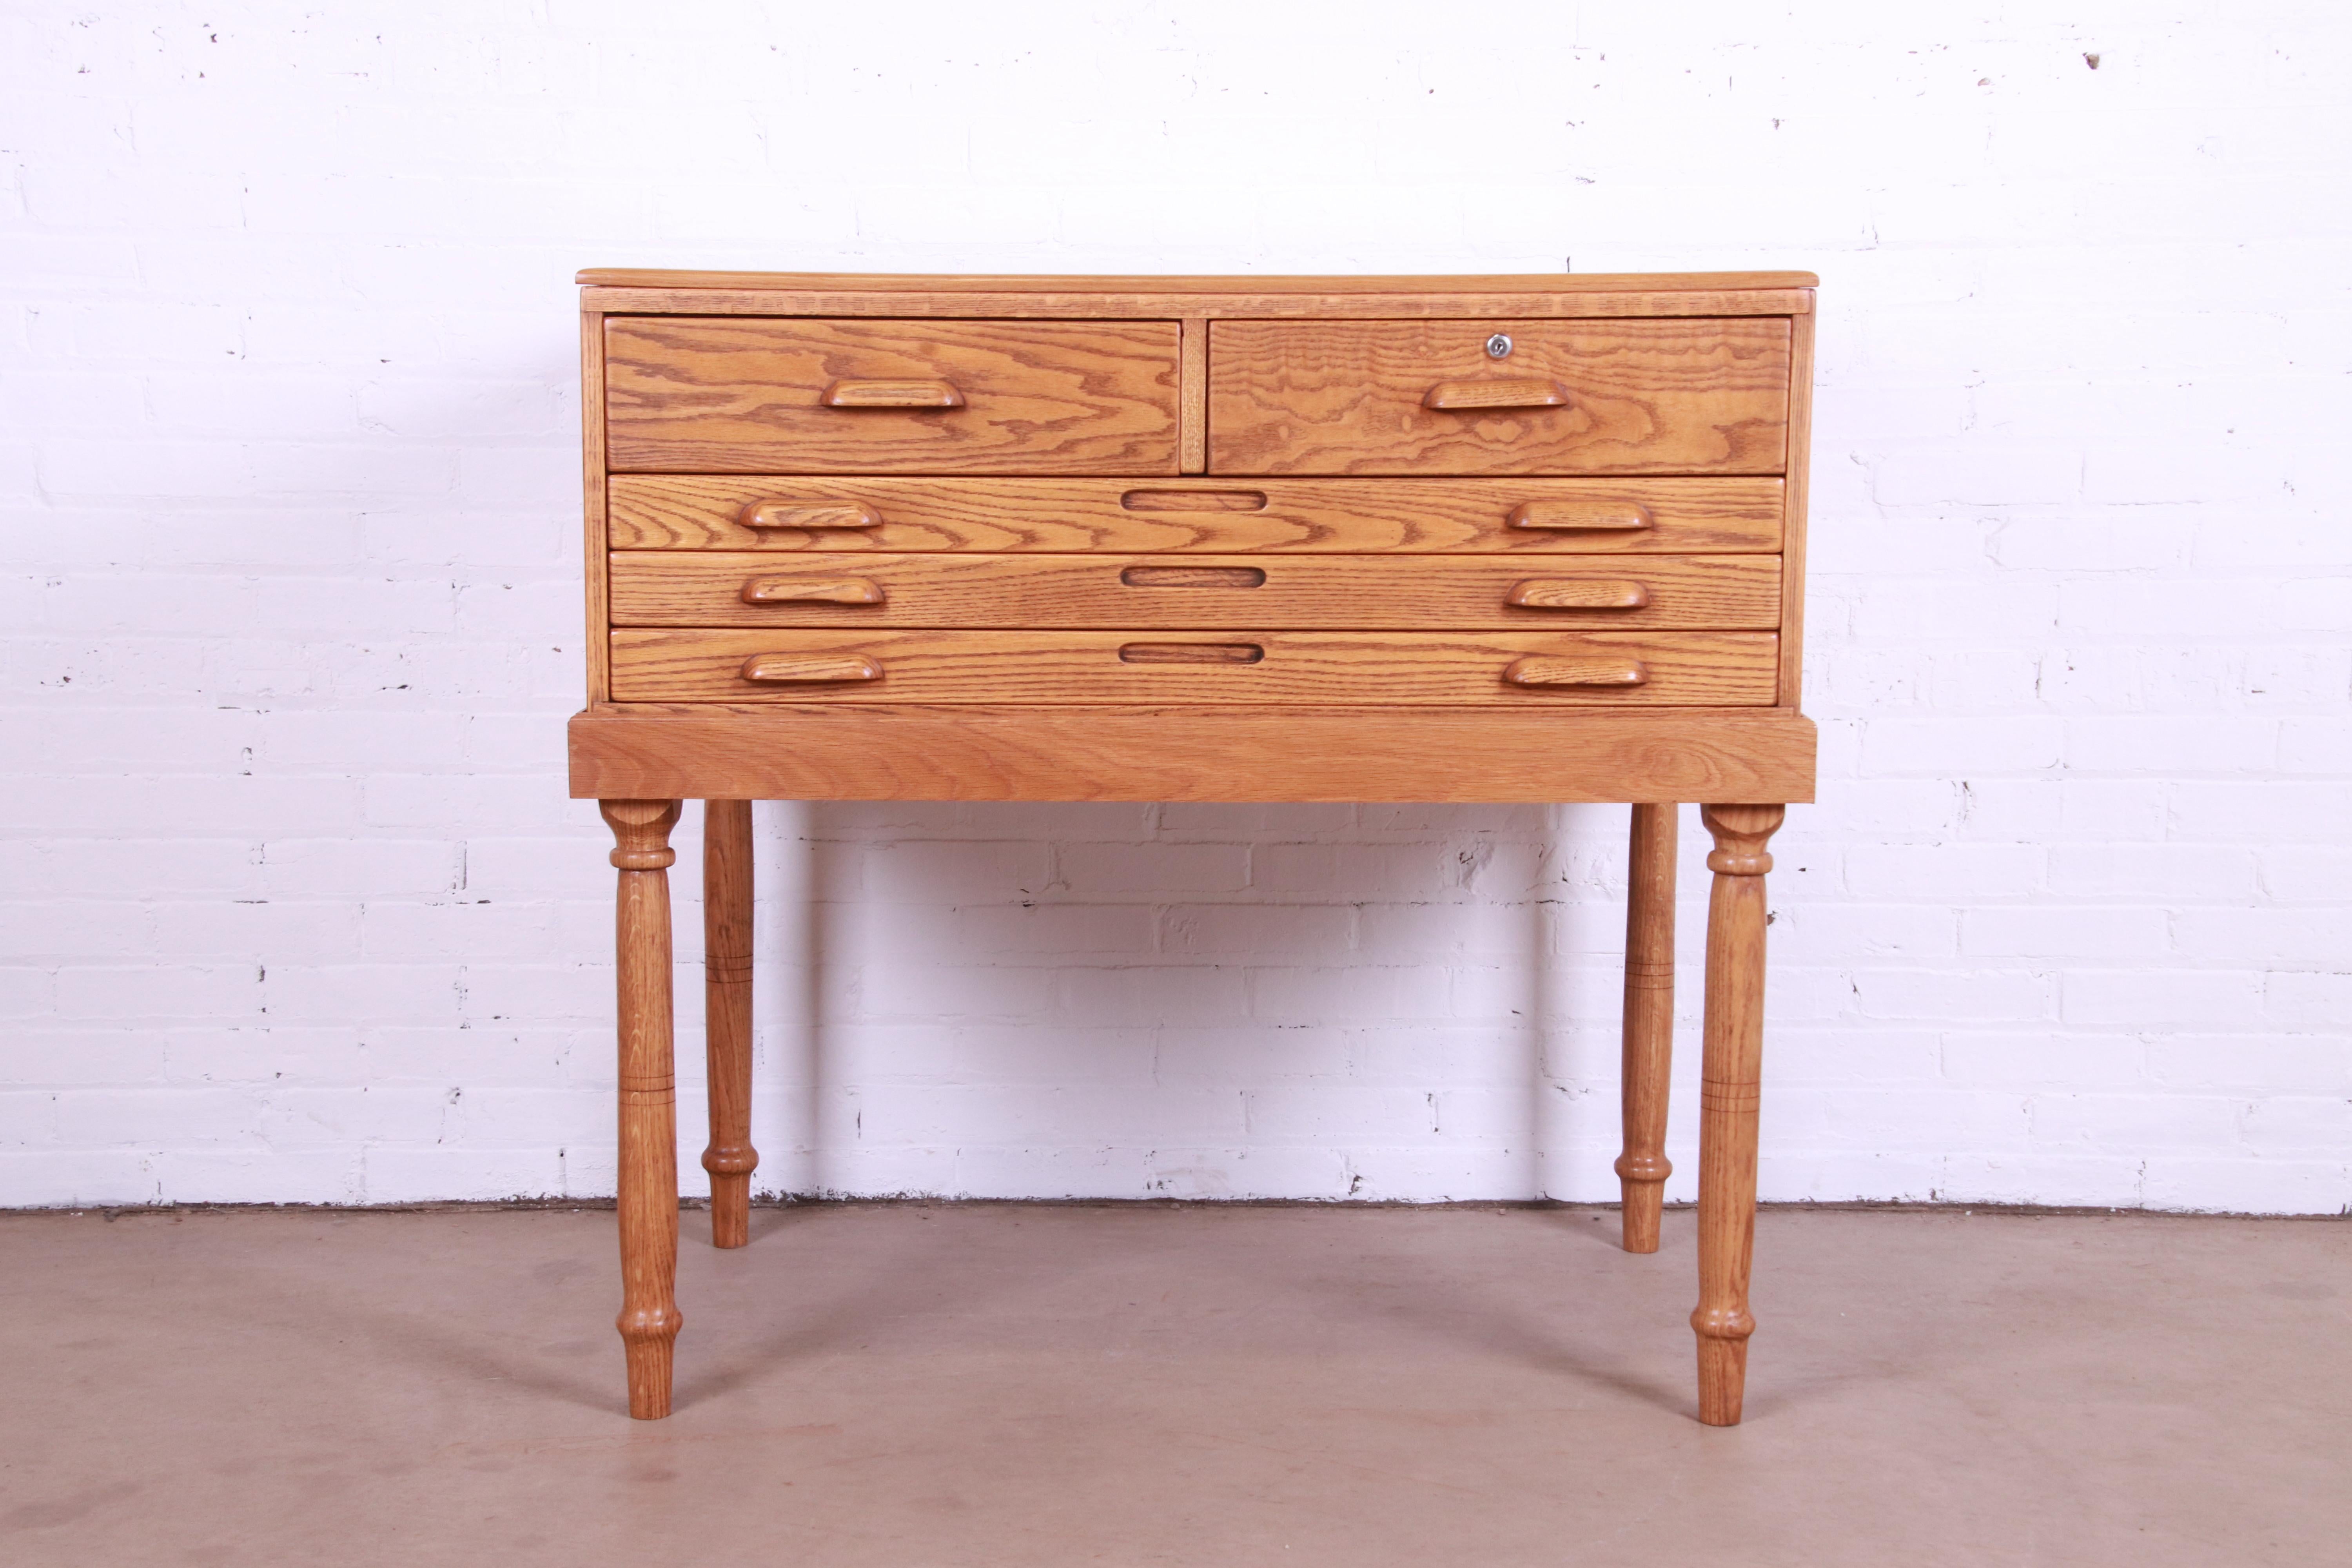 An exceptional Arts & Crafts style oak architect's blueprint or map flat file cabinet

USA, 20th century

Measures: 41.63